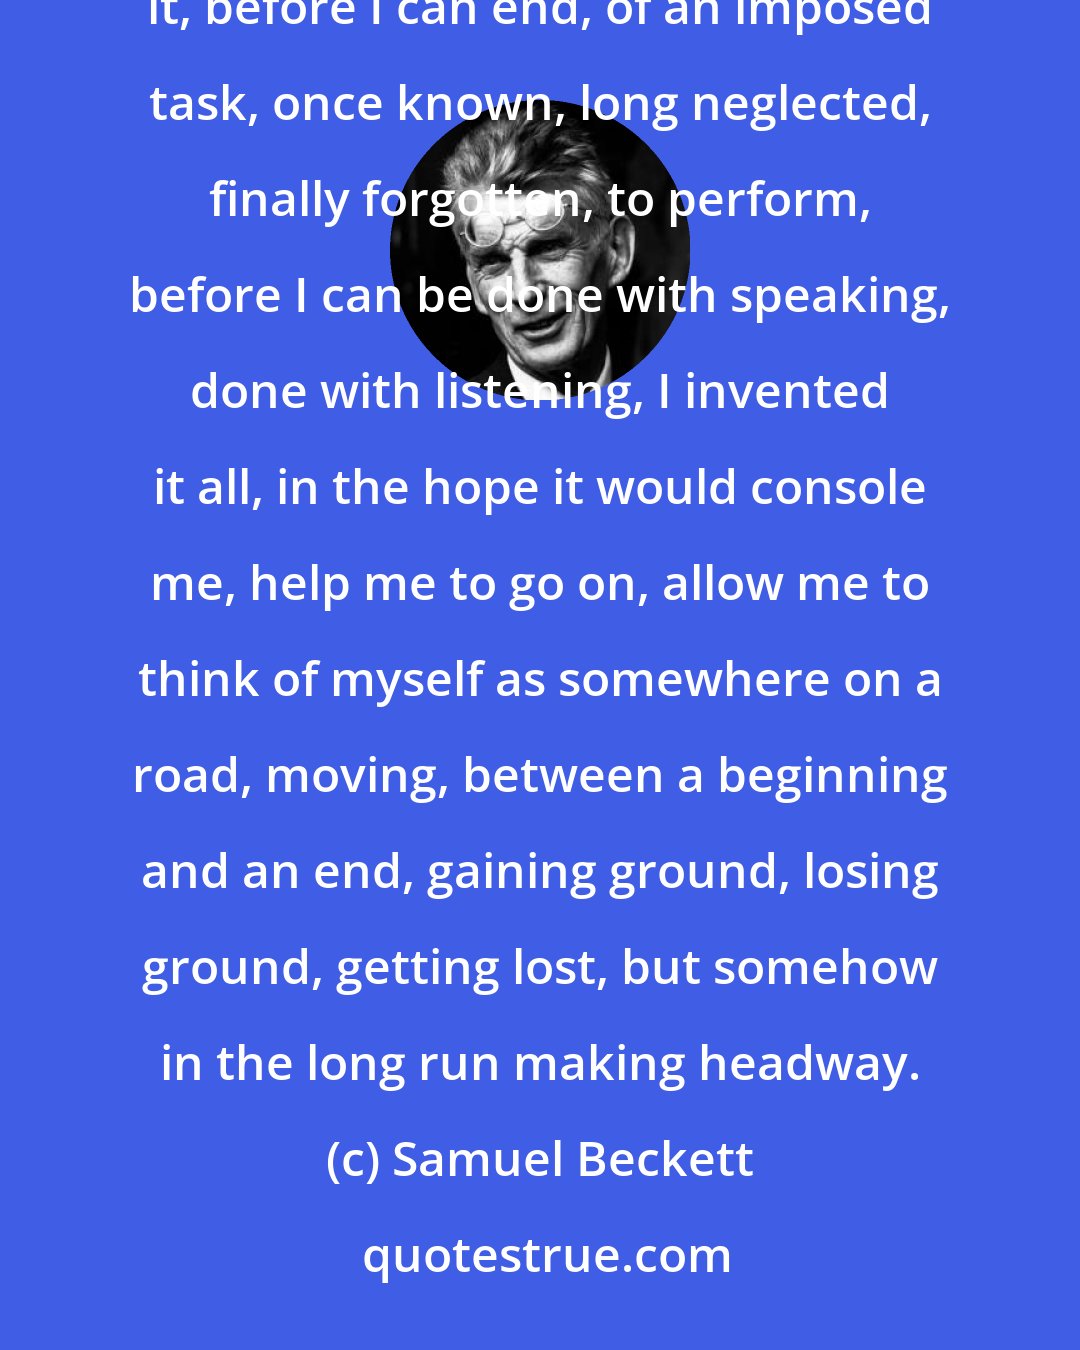 Samuel Beckett: All this business of a labour to accomplish, before I can end, of words to say, a truth to recover, in order to say it, before I can end, of an imposed task, once known, long neglected, finally forgotten, to perform, before I can be done with speaking, done with listening, I invented it all, in the hope it would console me, help me to go on, allow me to think of myself as somewhere on a road, moving, between a beginning and an end, gaining ground, losing ground, getting lost, but somehow in the long run making headway.